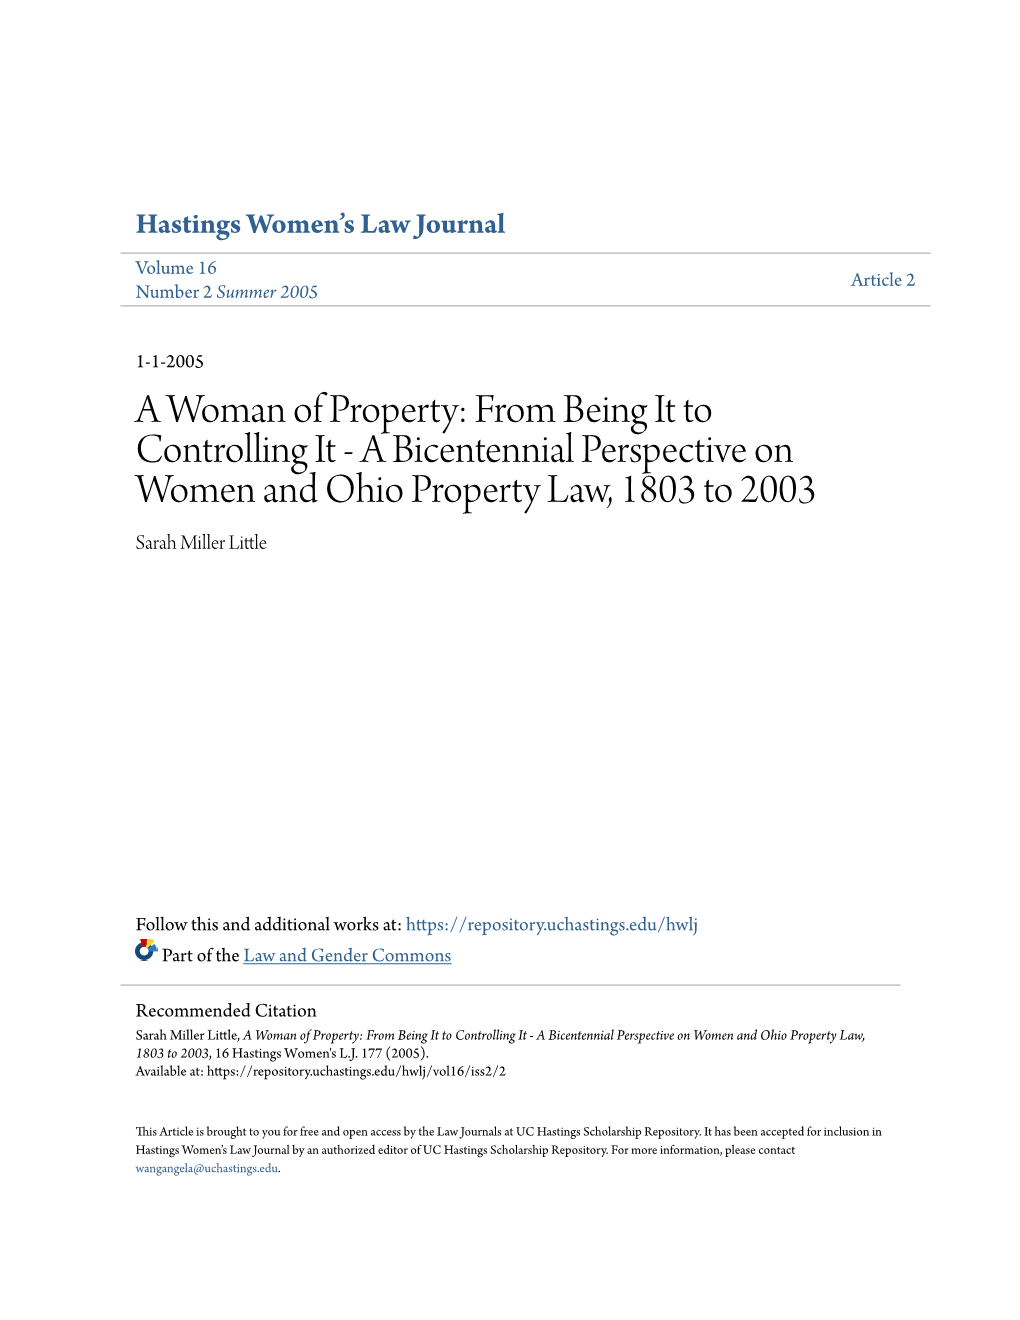 A Woman of Property: from Being It to Controlling It - a Bicentennial Perspective on Women and Ohio Property Law, 1803 to 2003 Sarah Miller Little